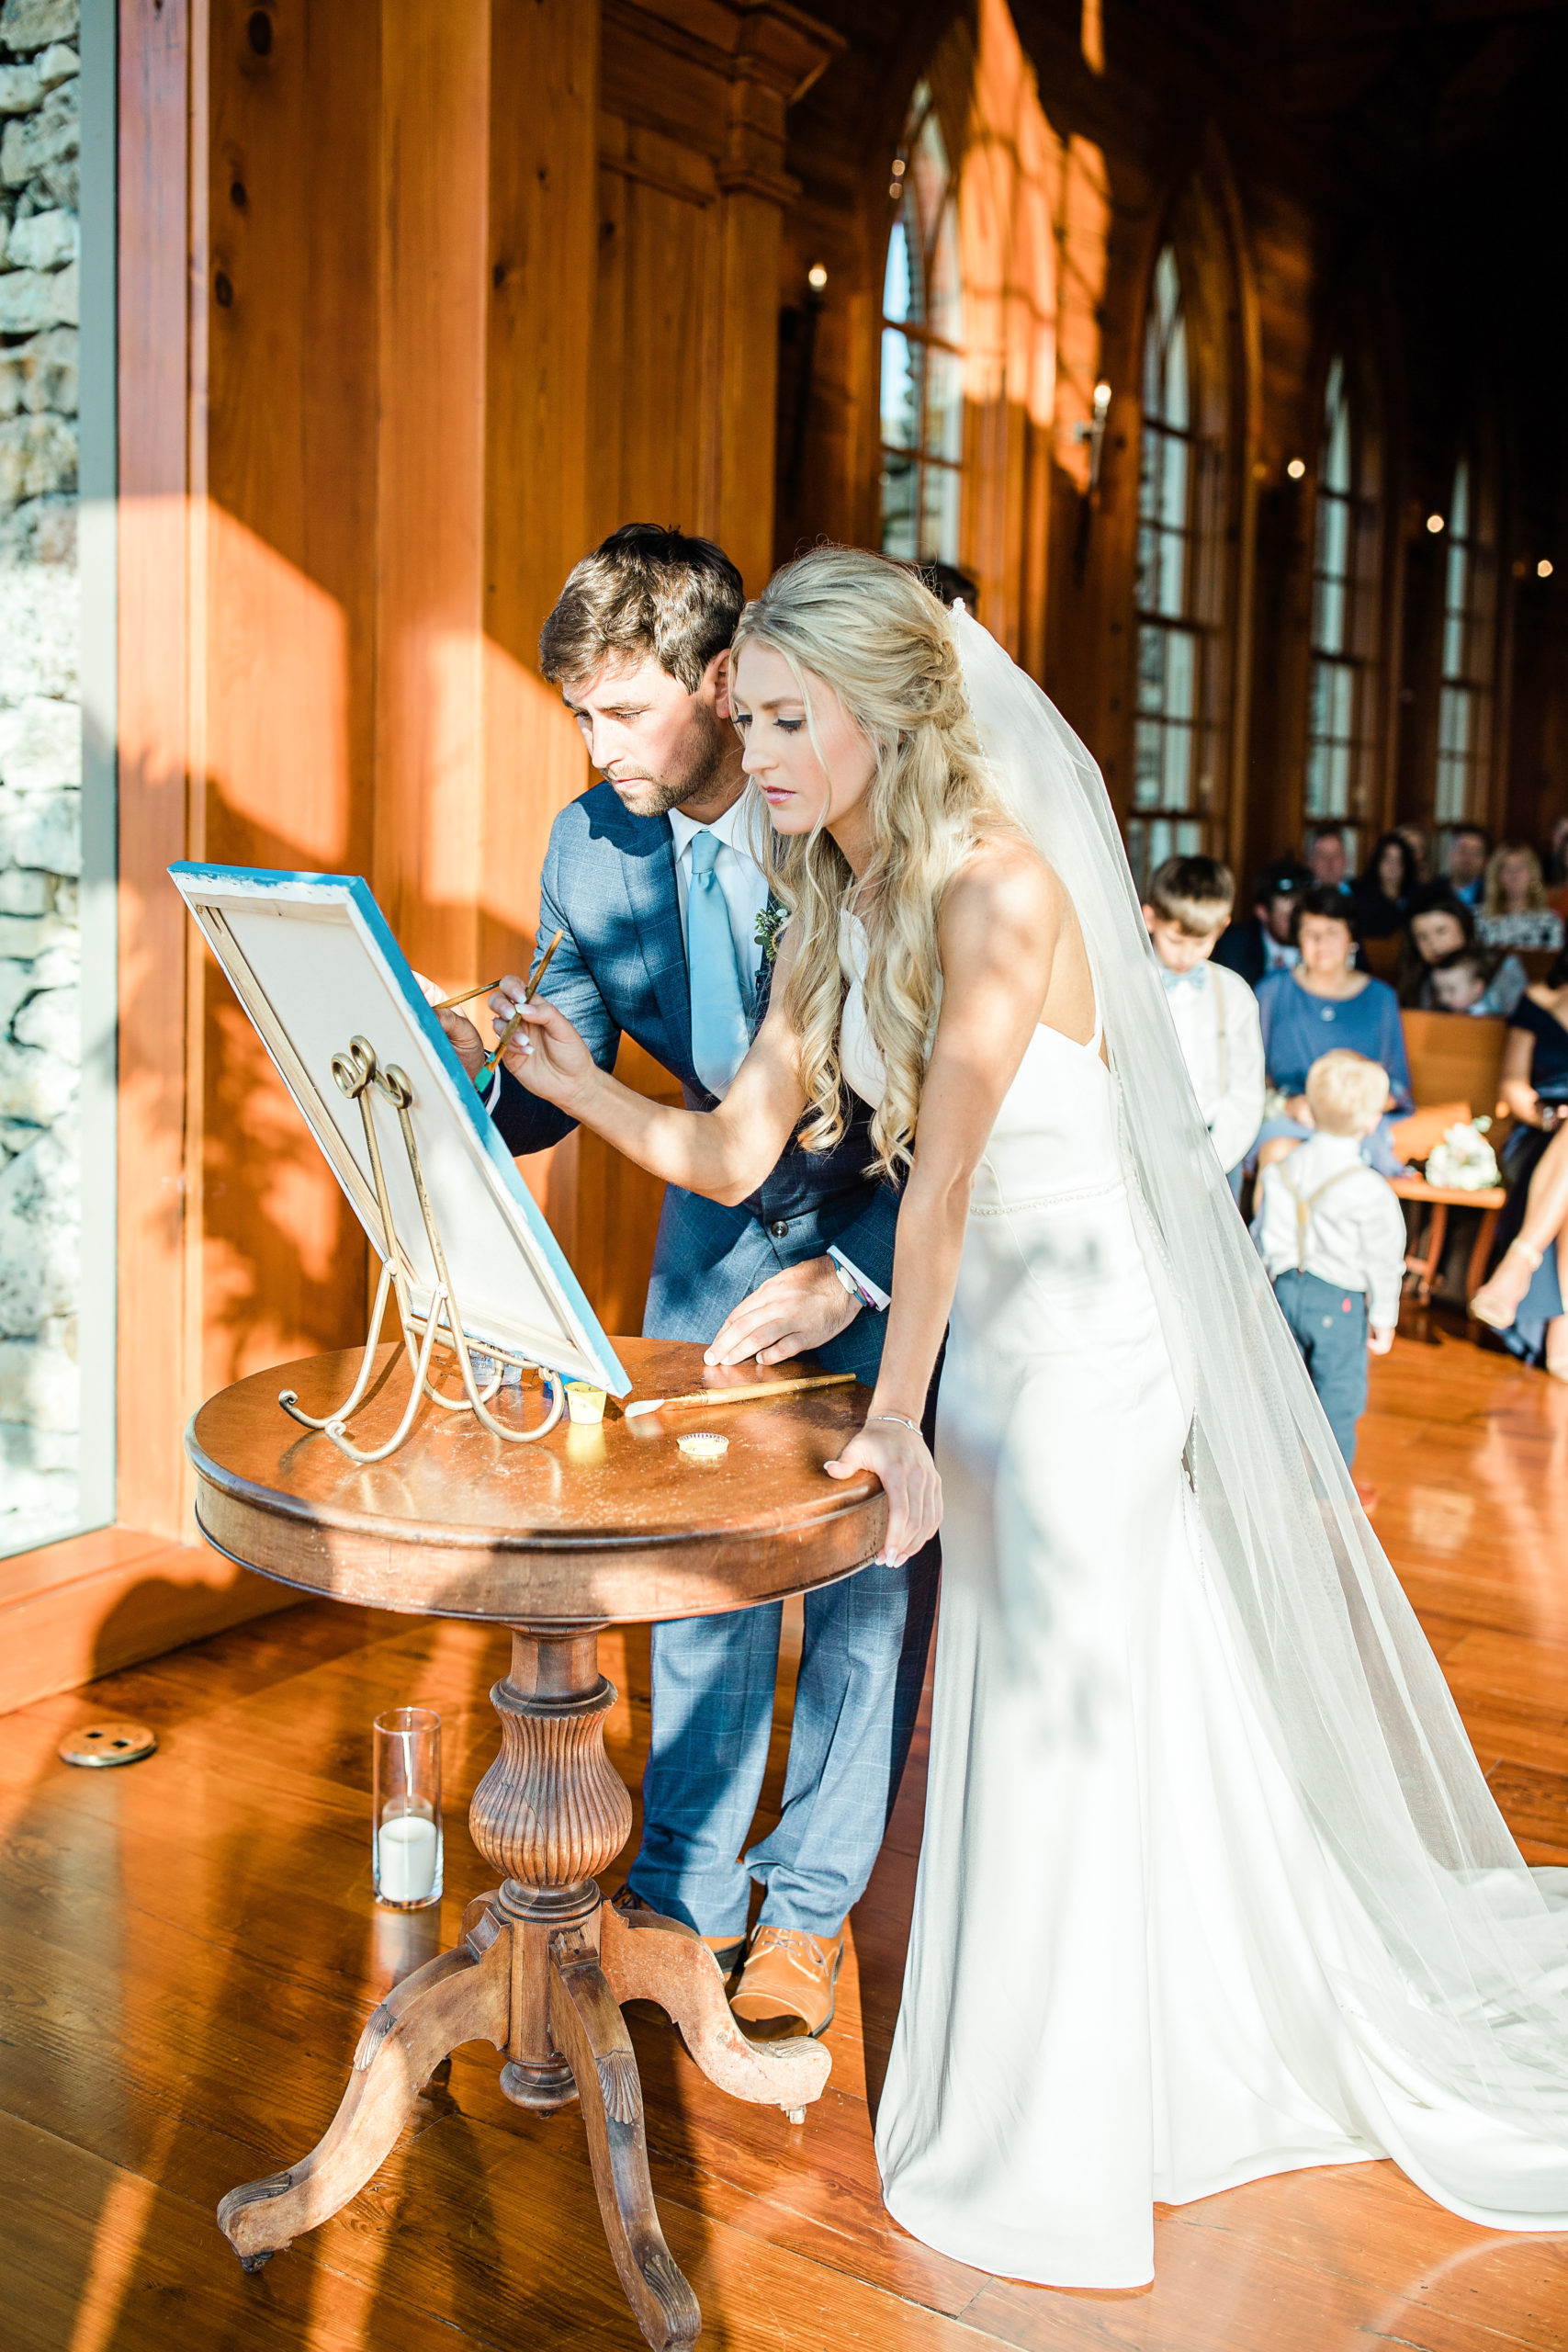 Bride and groom painting during their ceremony exchange